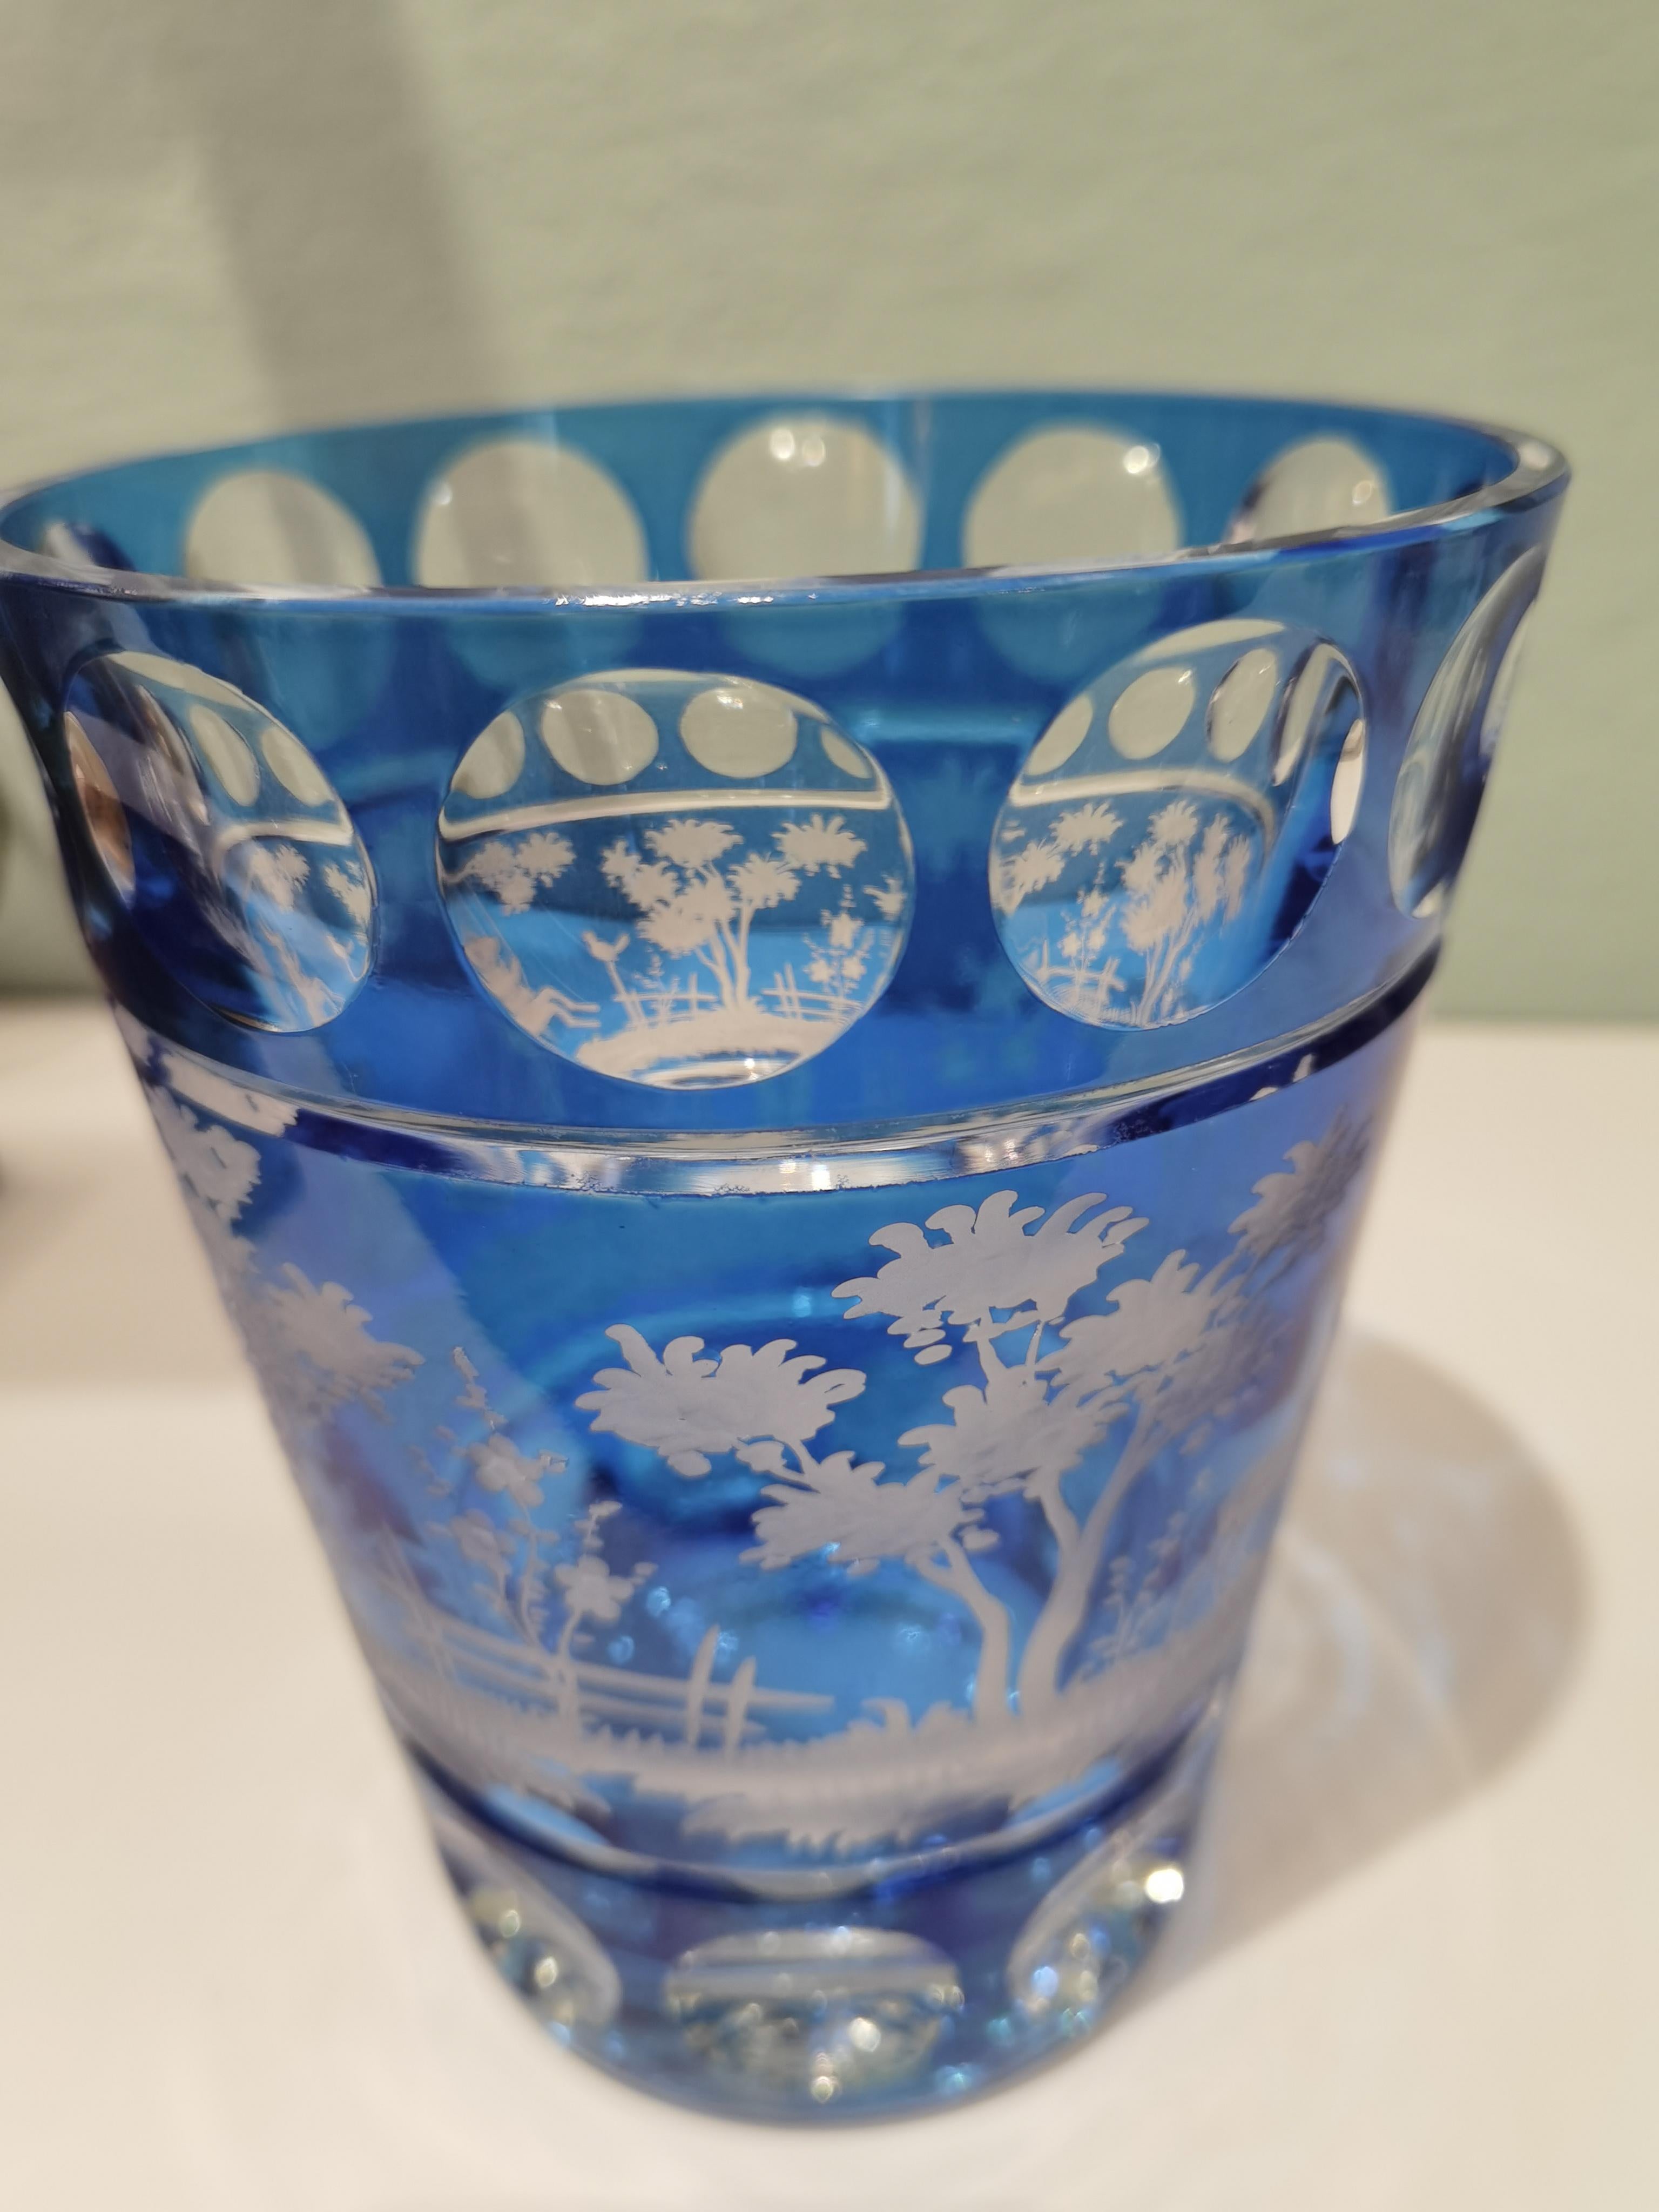 Hand blown crystal vase in blue glass with a country style decor all around. The leaves and deers are hand-engraved by glass artists in Bavaria/Germany. One side shows a bunny and the backside deers. The glass here shown comes in a blue color and